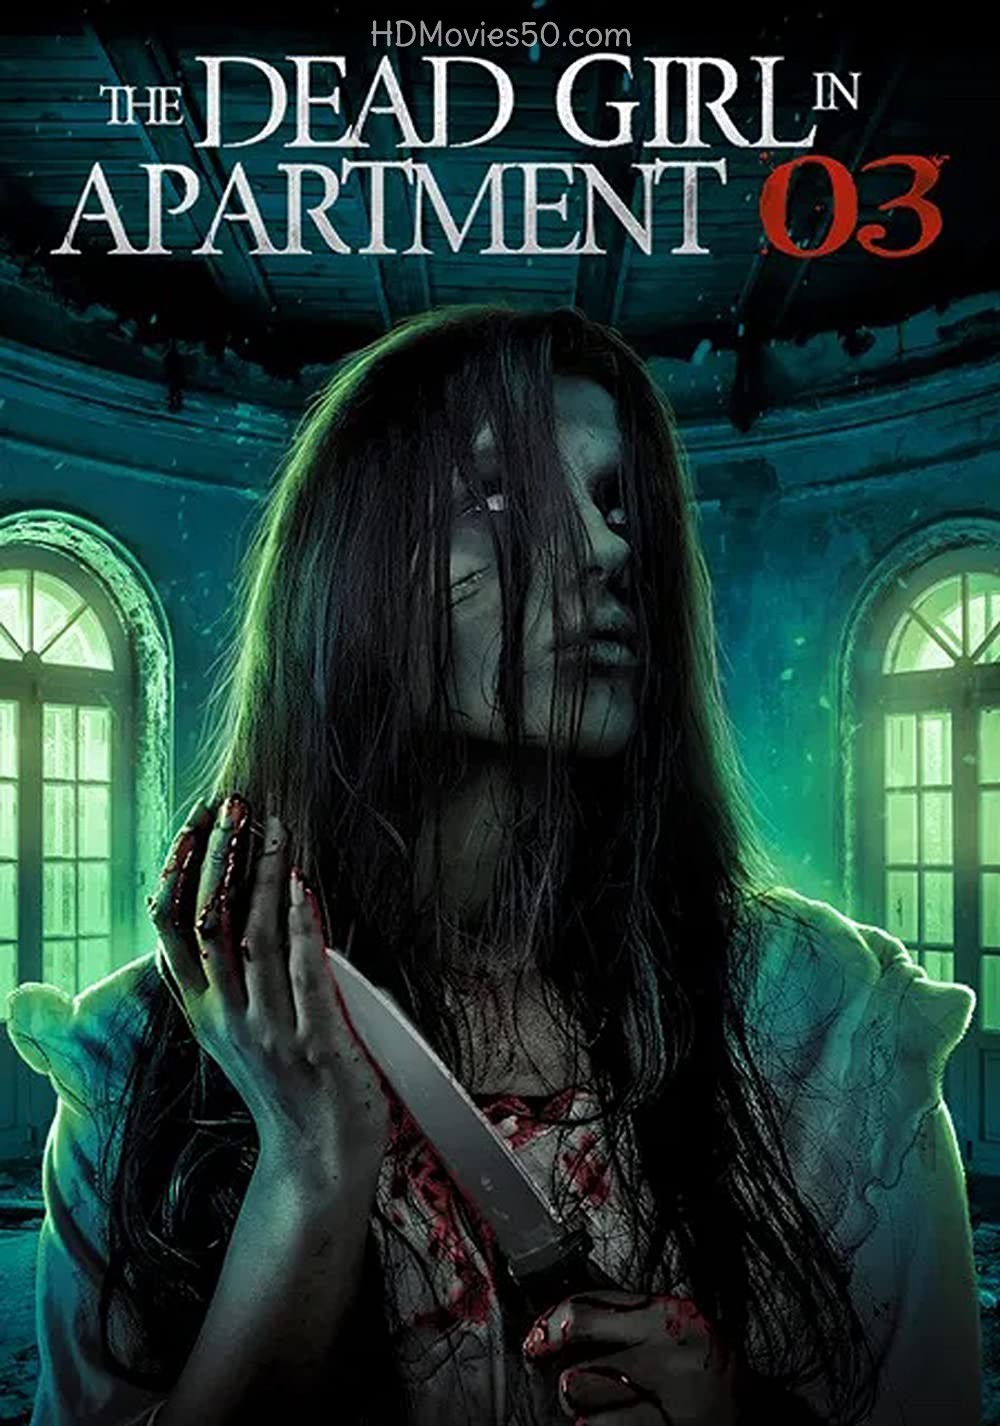 Download The Dead Girl in Apartment 03 2022 English Movie 1080p AMZN HDRip 1.4GB